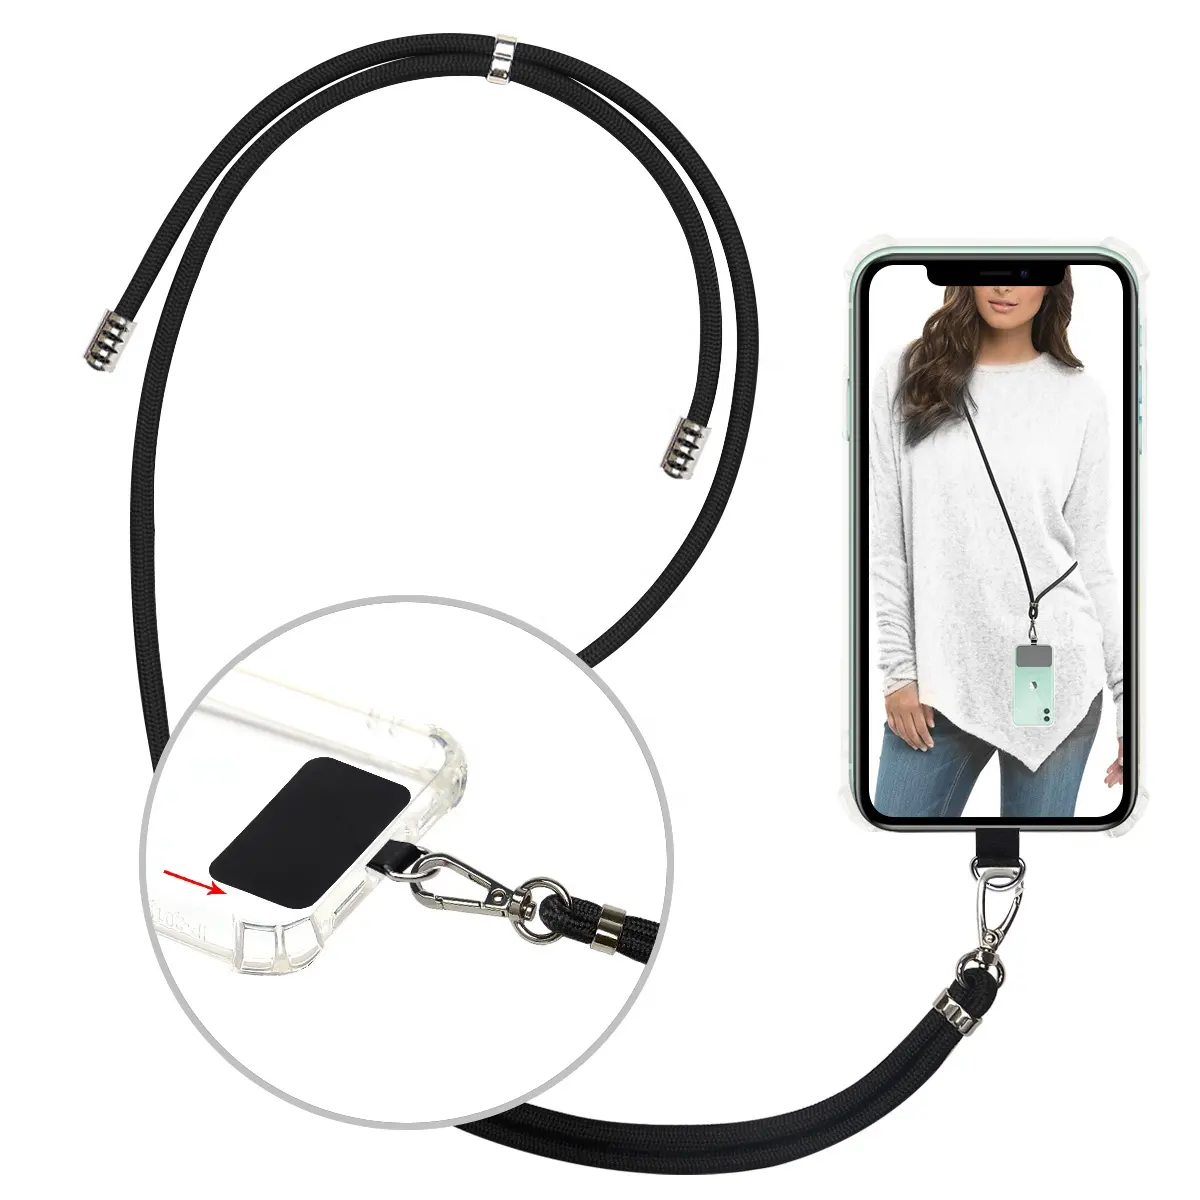 Phone Strap Black Nylon Lanyard Neck Shoulder Strap Phone Case With Fabric Pad For Apple Iphone 6-12 6.1 Inch